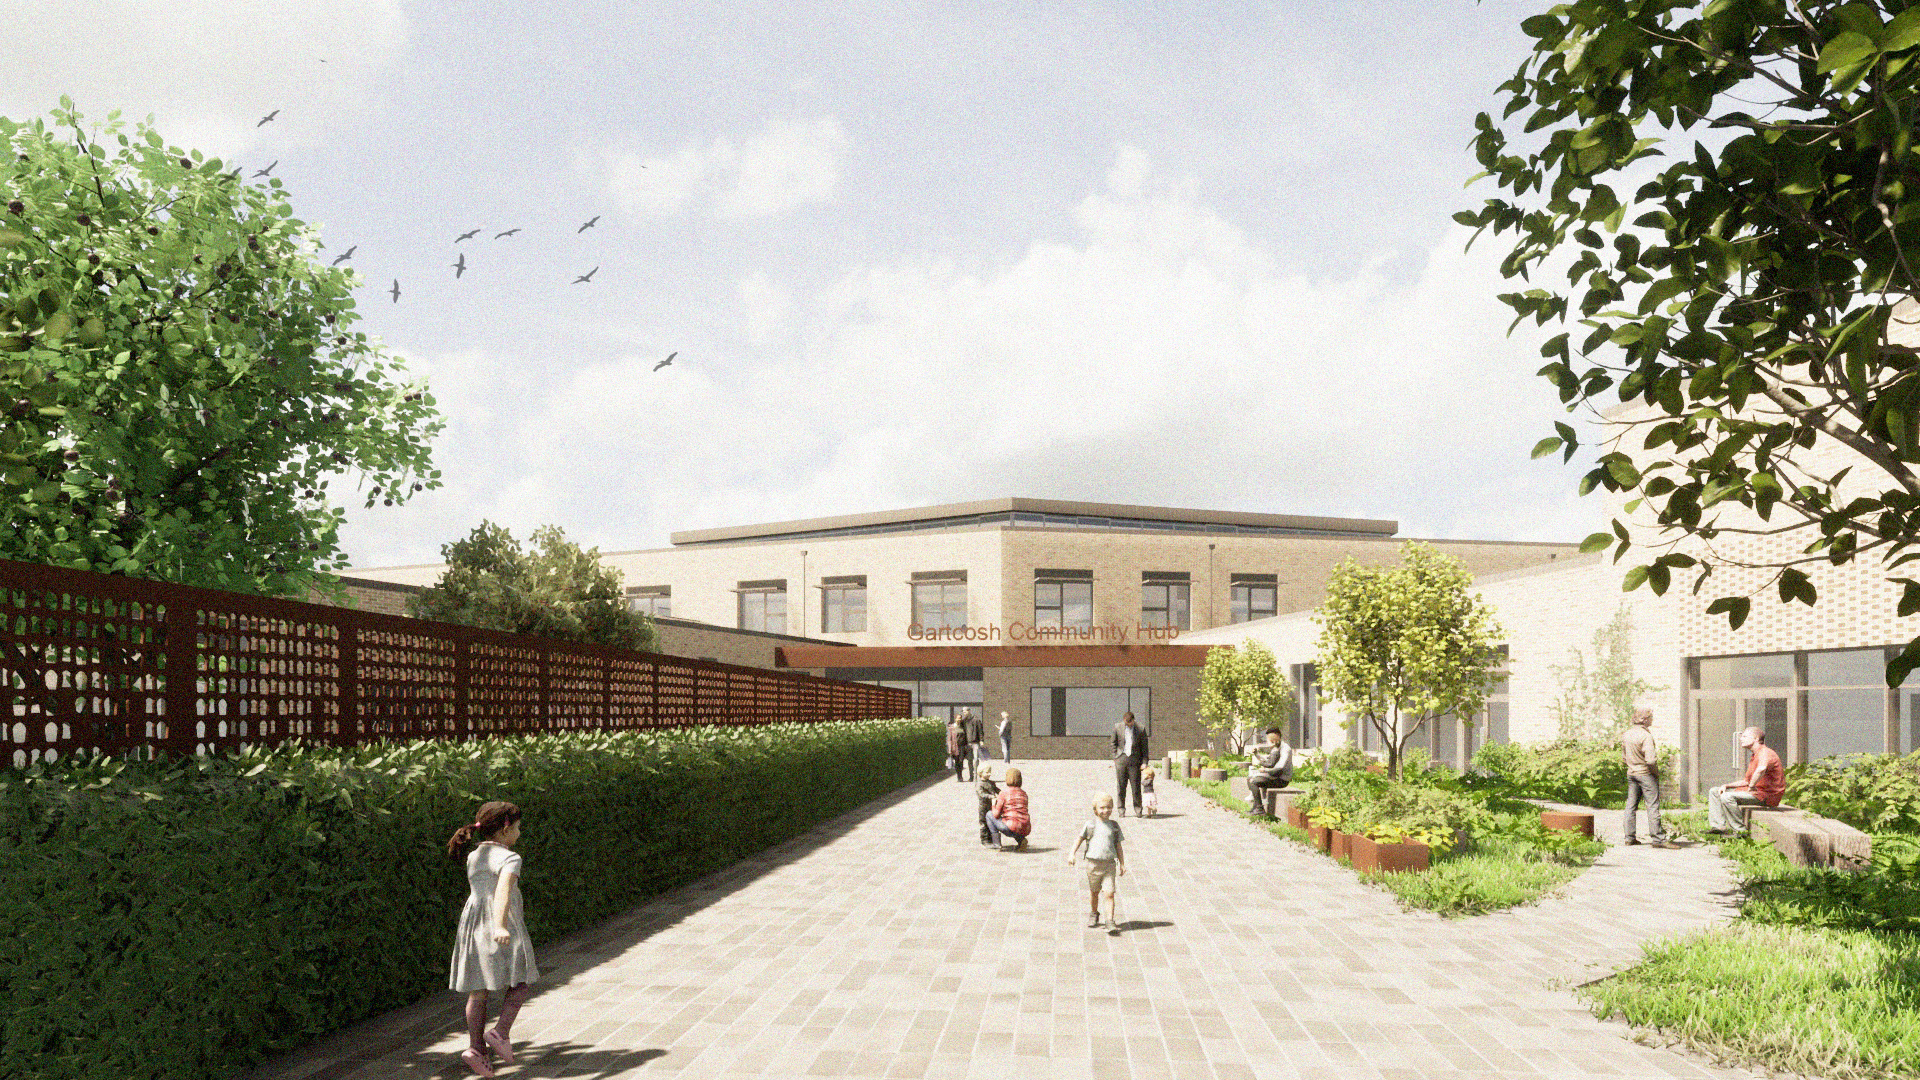 Planning approval awarded for Gartcosh community hub project